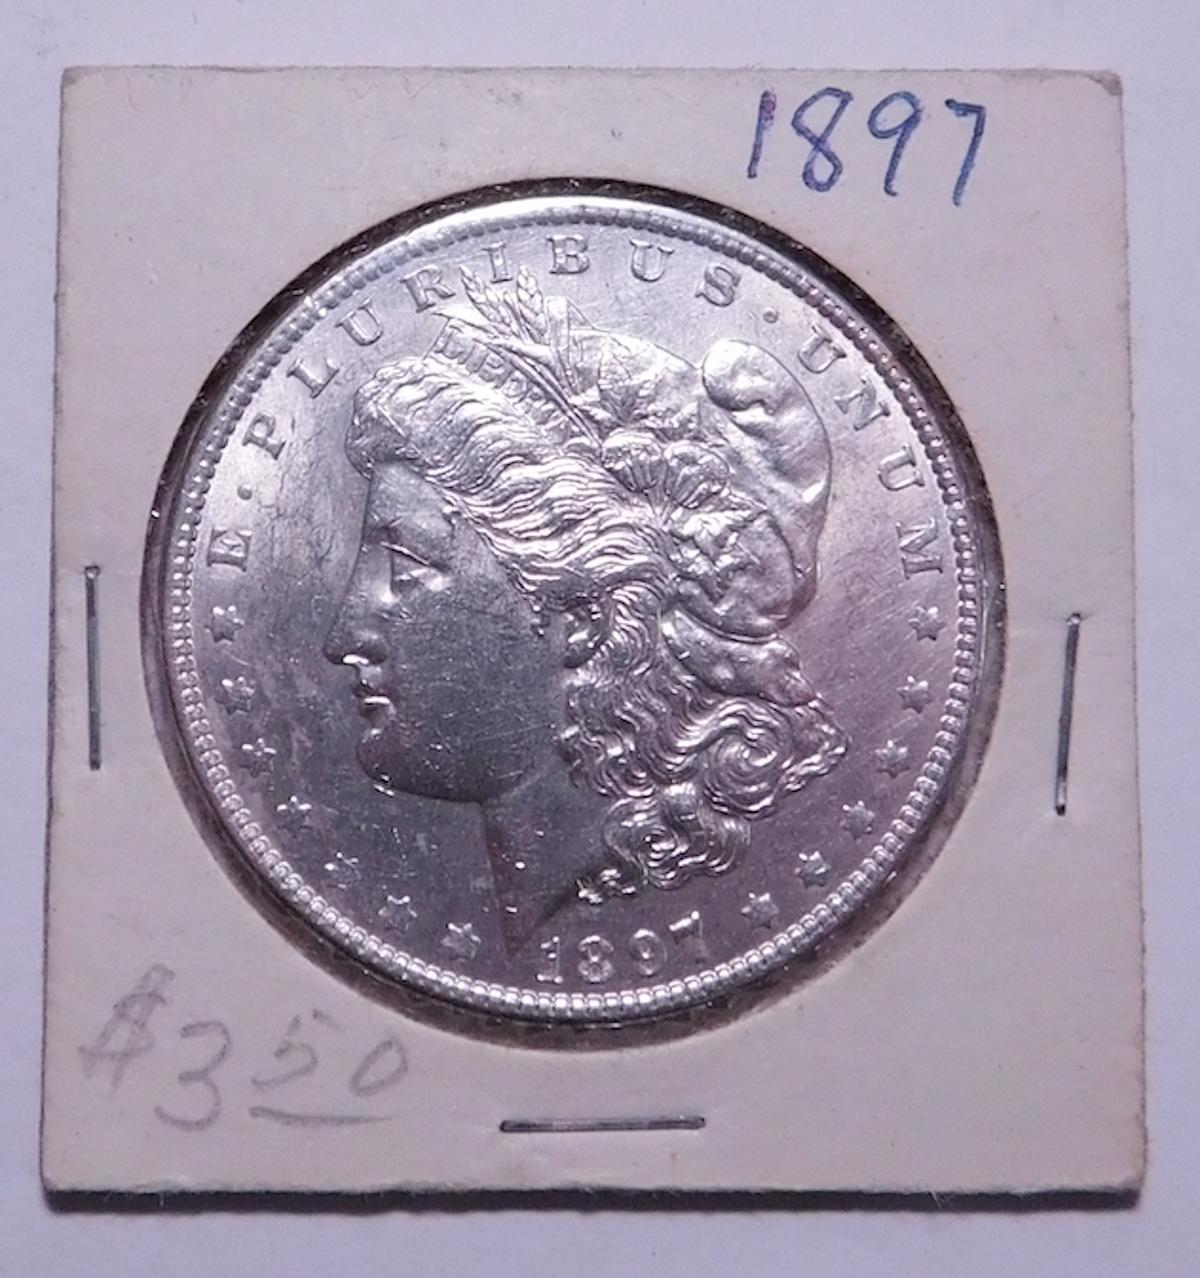 1897 PHIL MORGAN ABOUT UNCIRCULATED